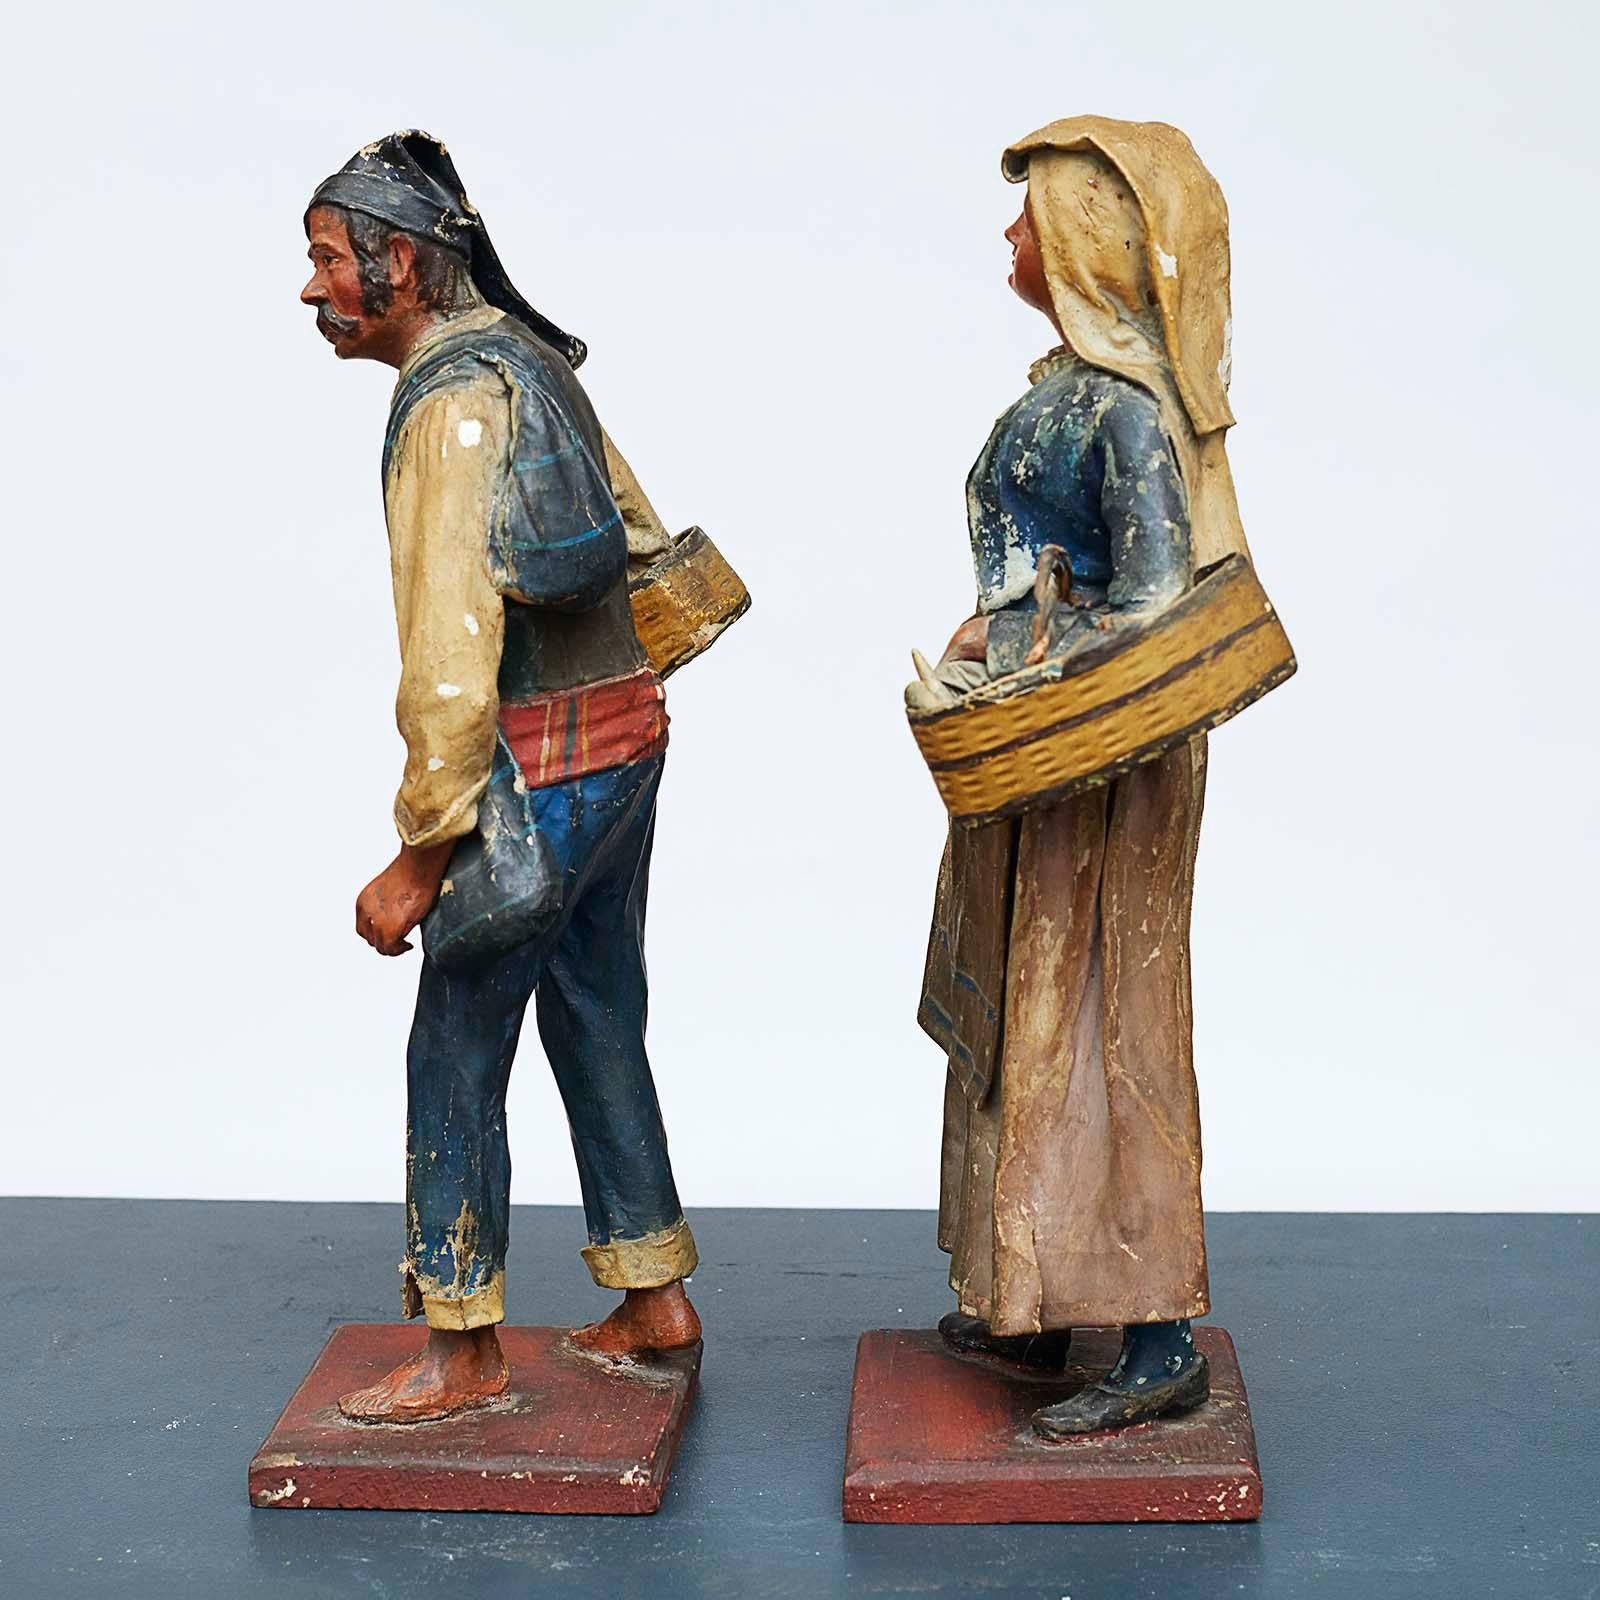 Pair of decorative papier mâché figures. From Naples, Italy, 18th century. Intact with original colors. Very charming. Sold as a couple.